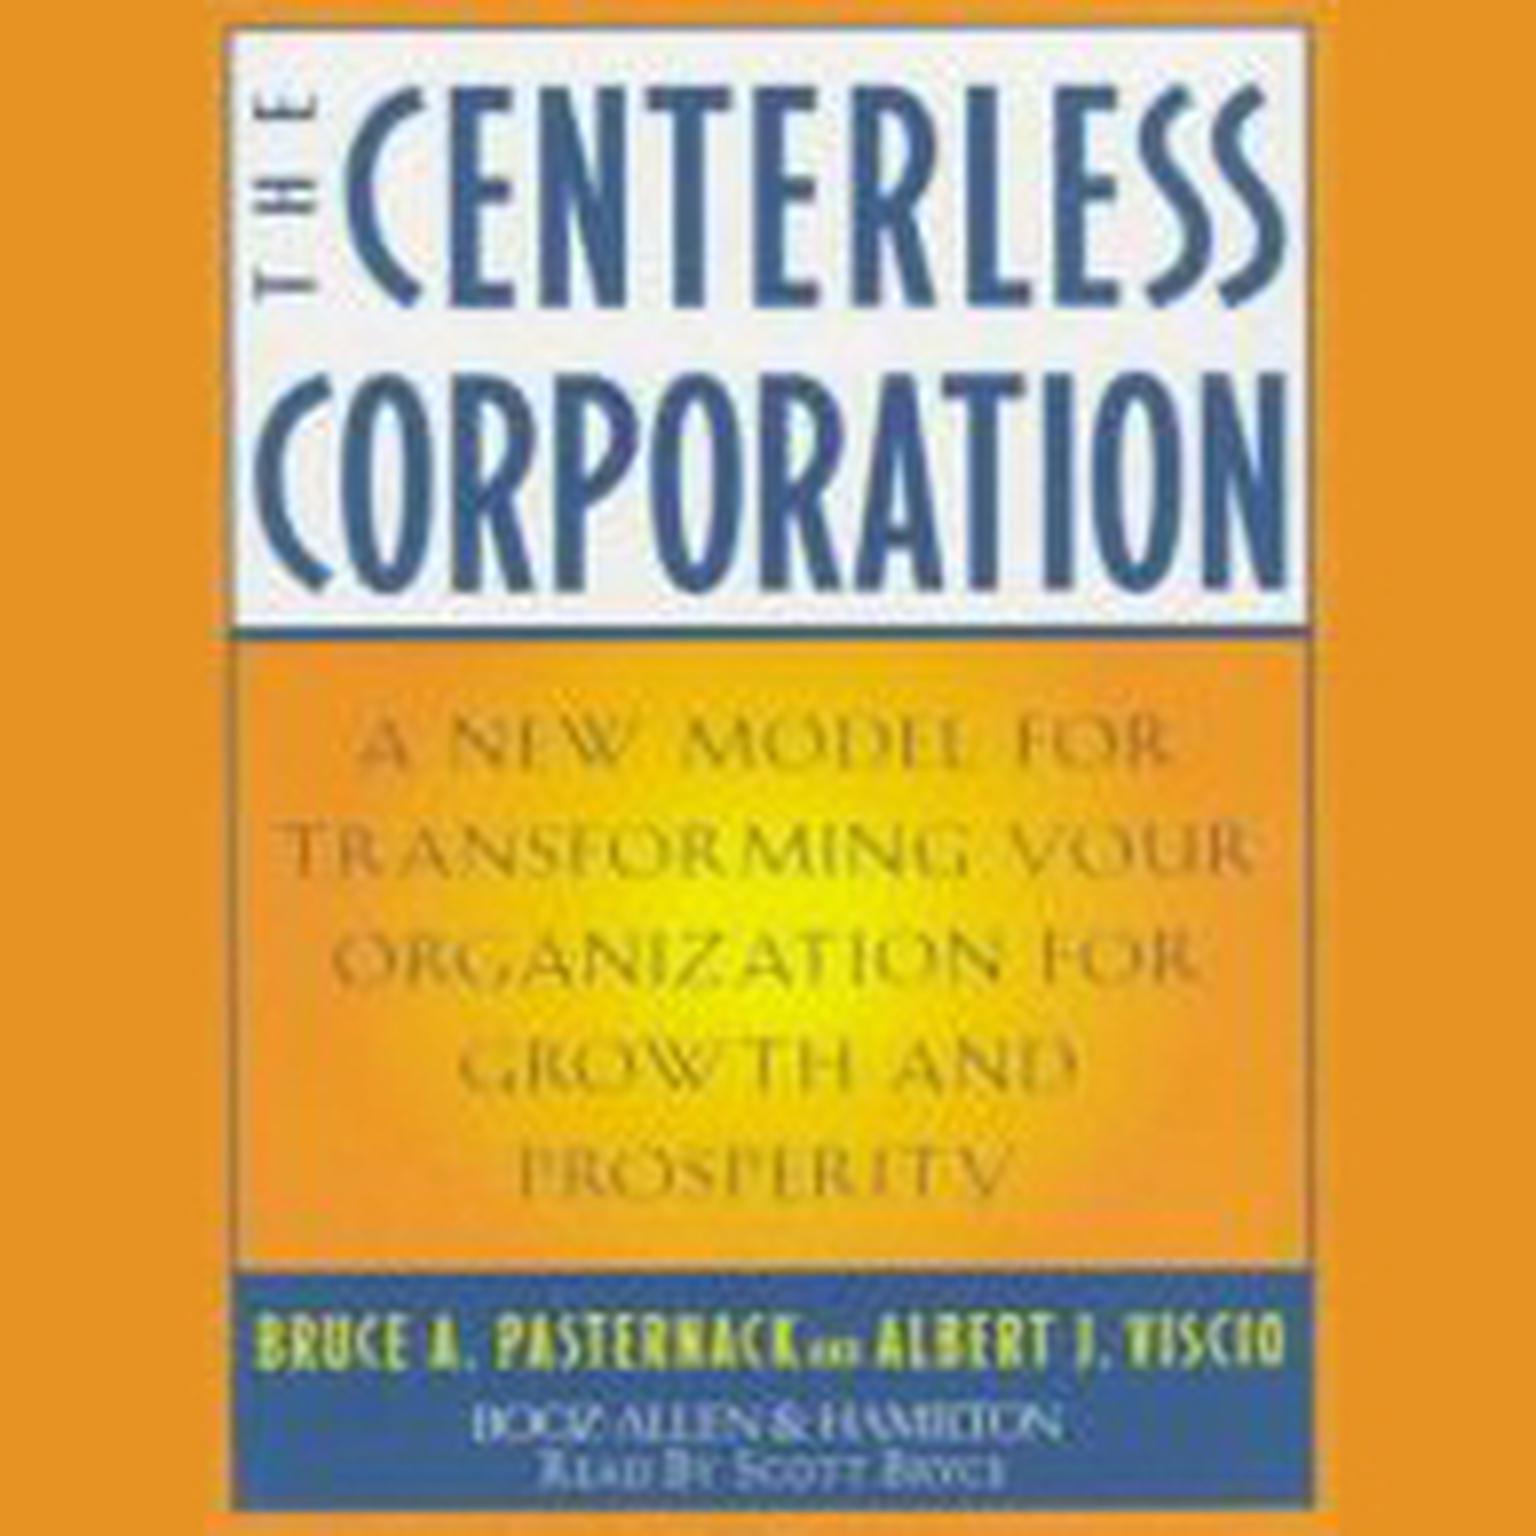 The Centerless Corporation (Abridged): A New Model for Transforming Your Organization for Growth and Prosperity Audiobook, by Bruce A. Pasternack